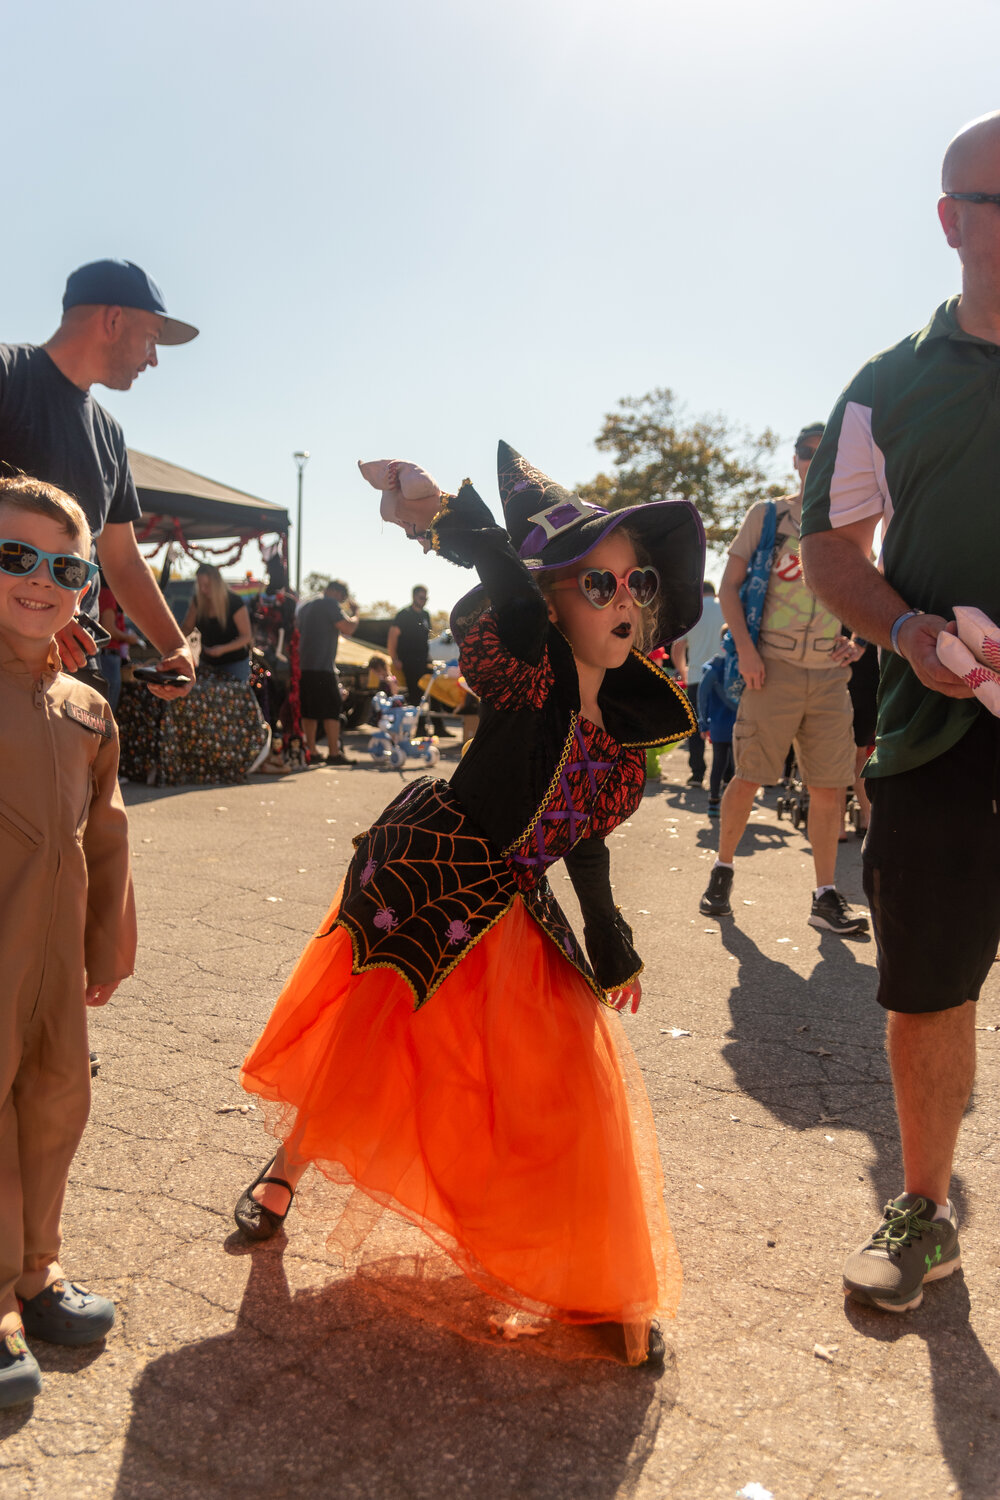 Emma, 7, throwing heat at a Trunk-or-Treat event in Seamans Neck Park last Saturday. Parents and children dressed in spooky costumes for a fun and safe trick-or-treat at the Seaford park.